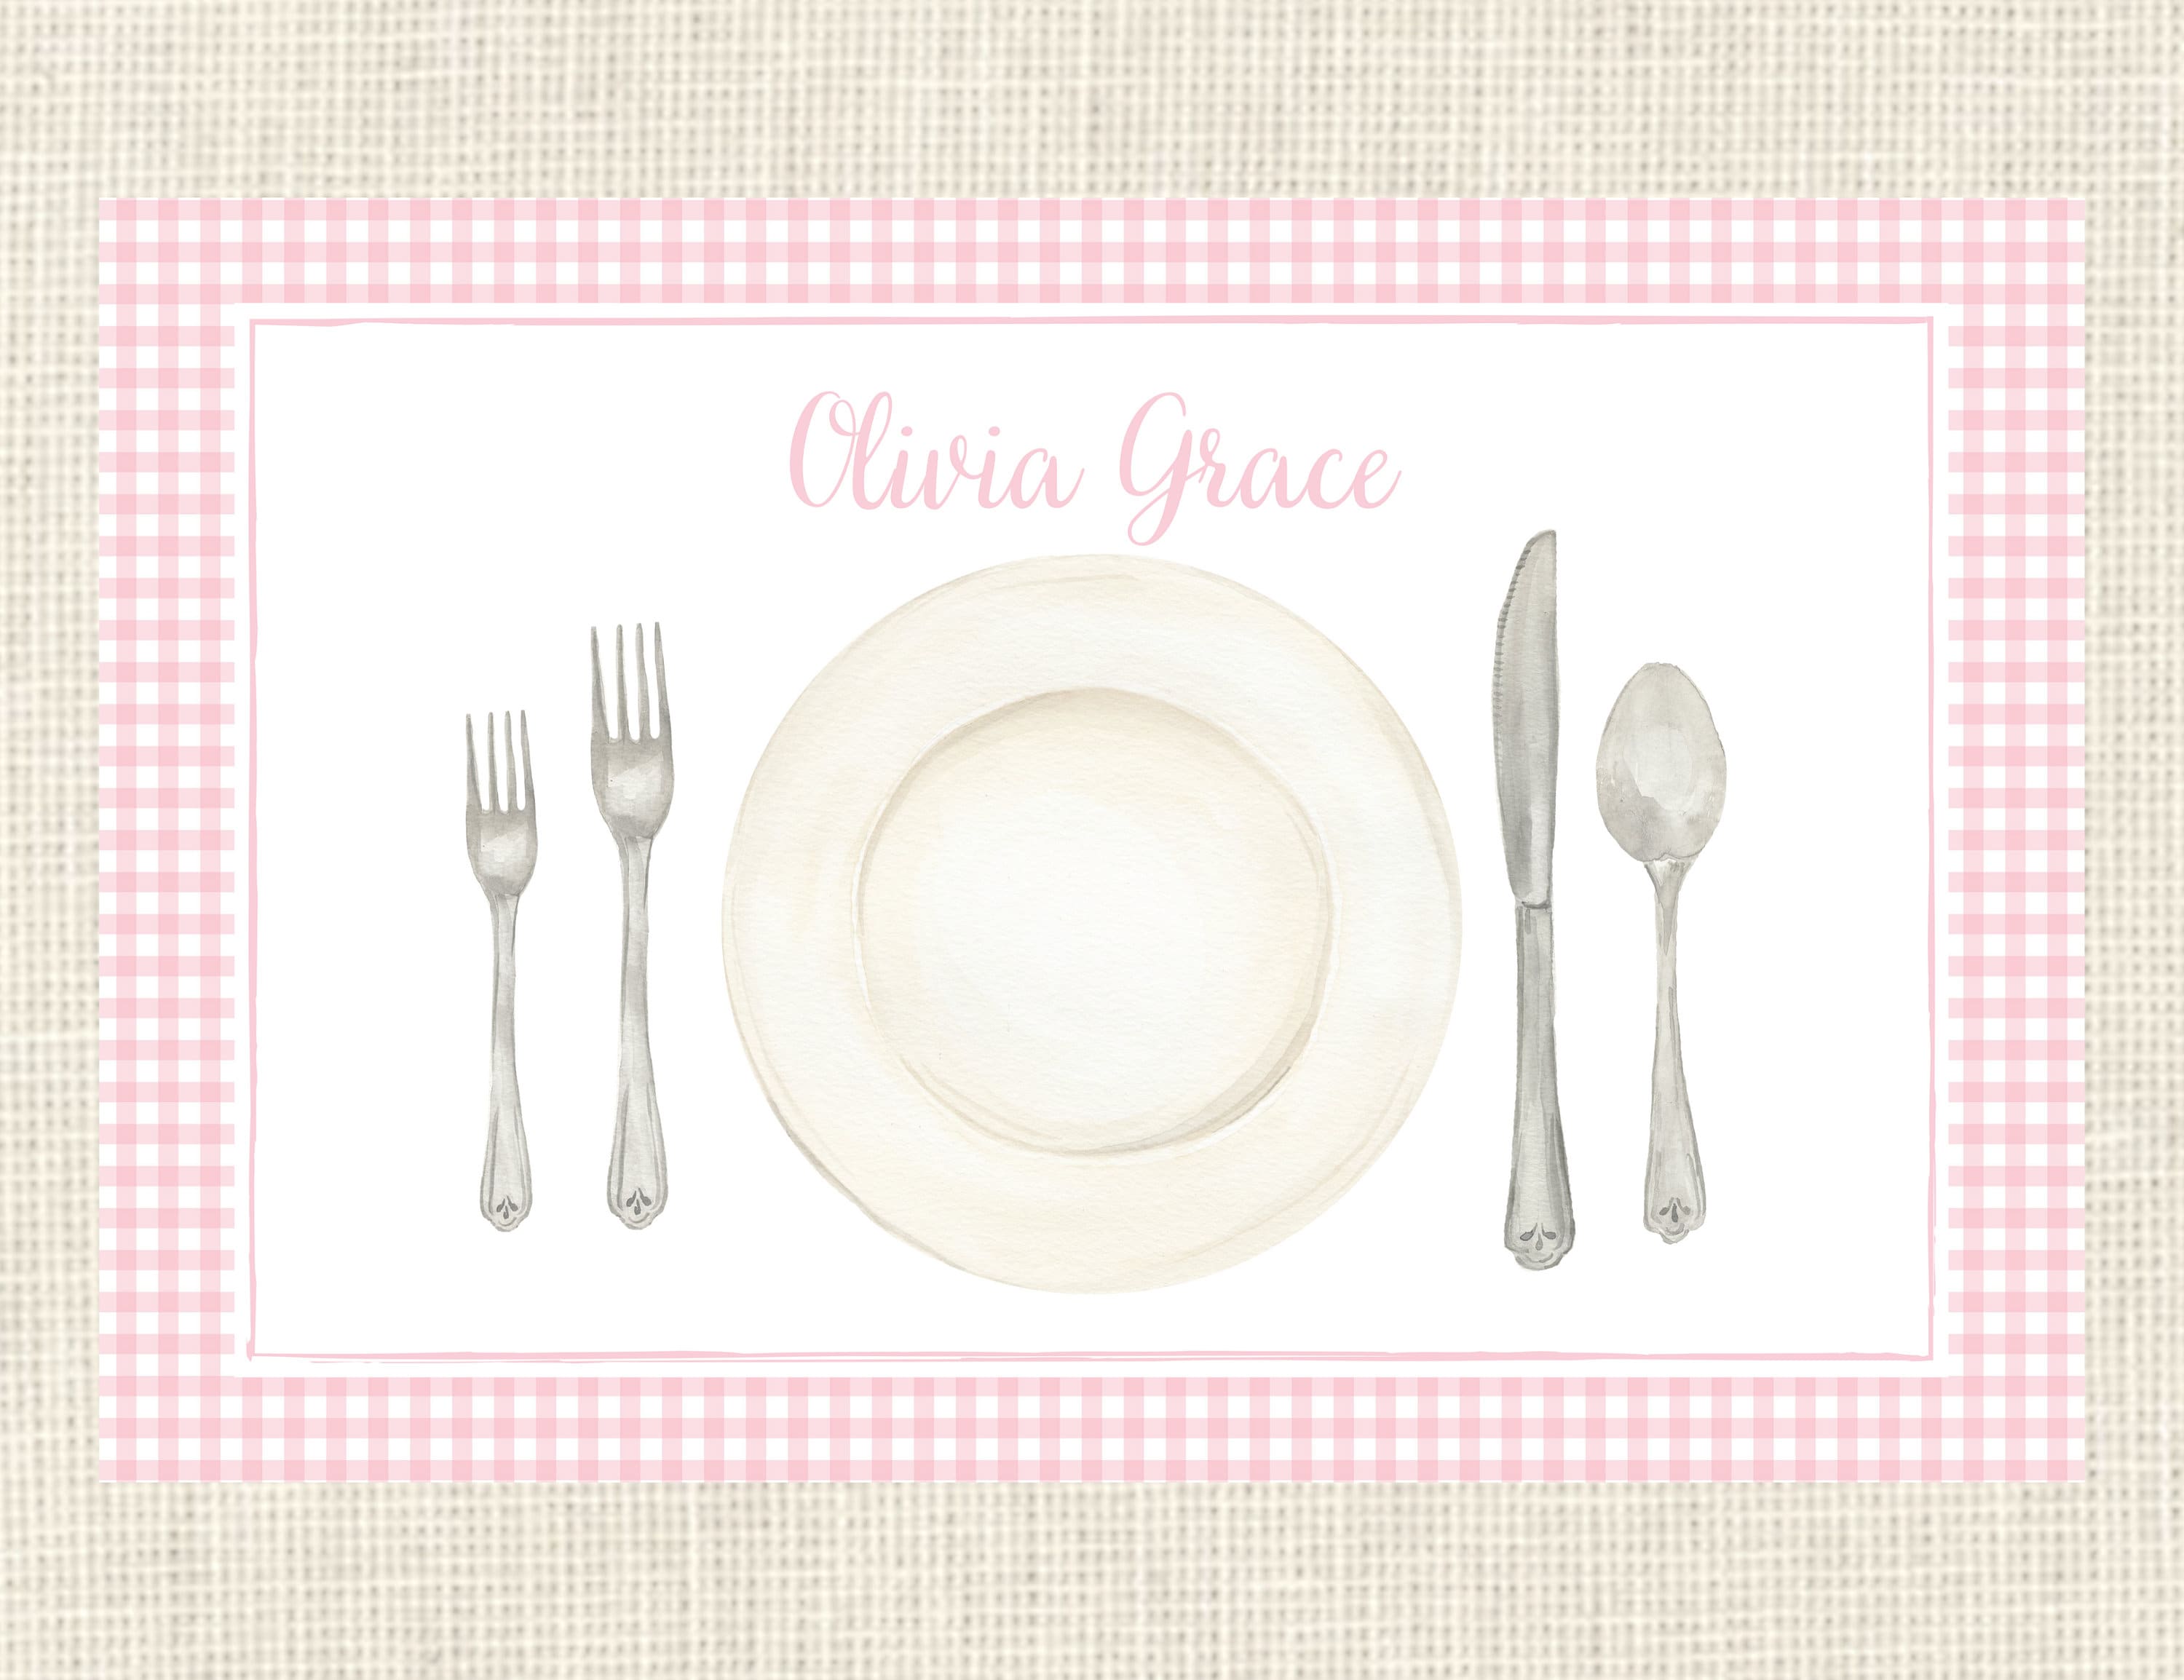 Personalized Paper Placemats / Disposable Placemats / Place Setting  /gingham / Dining / Formal / Heirloom 